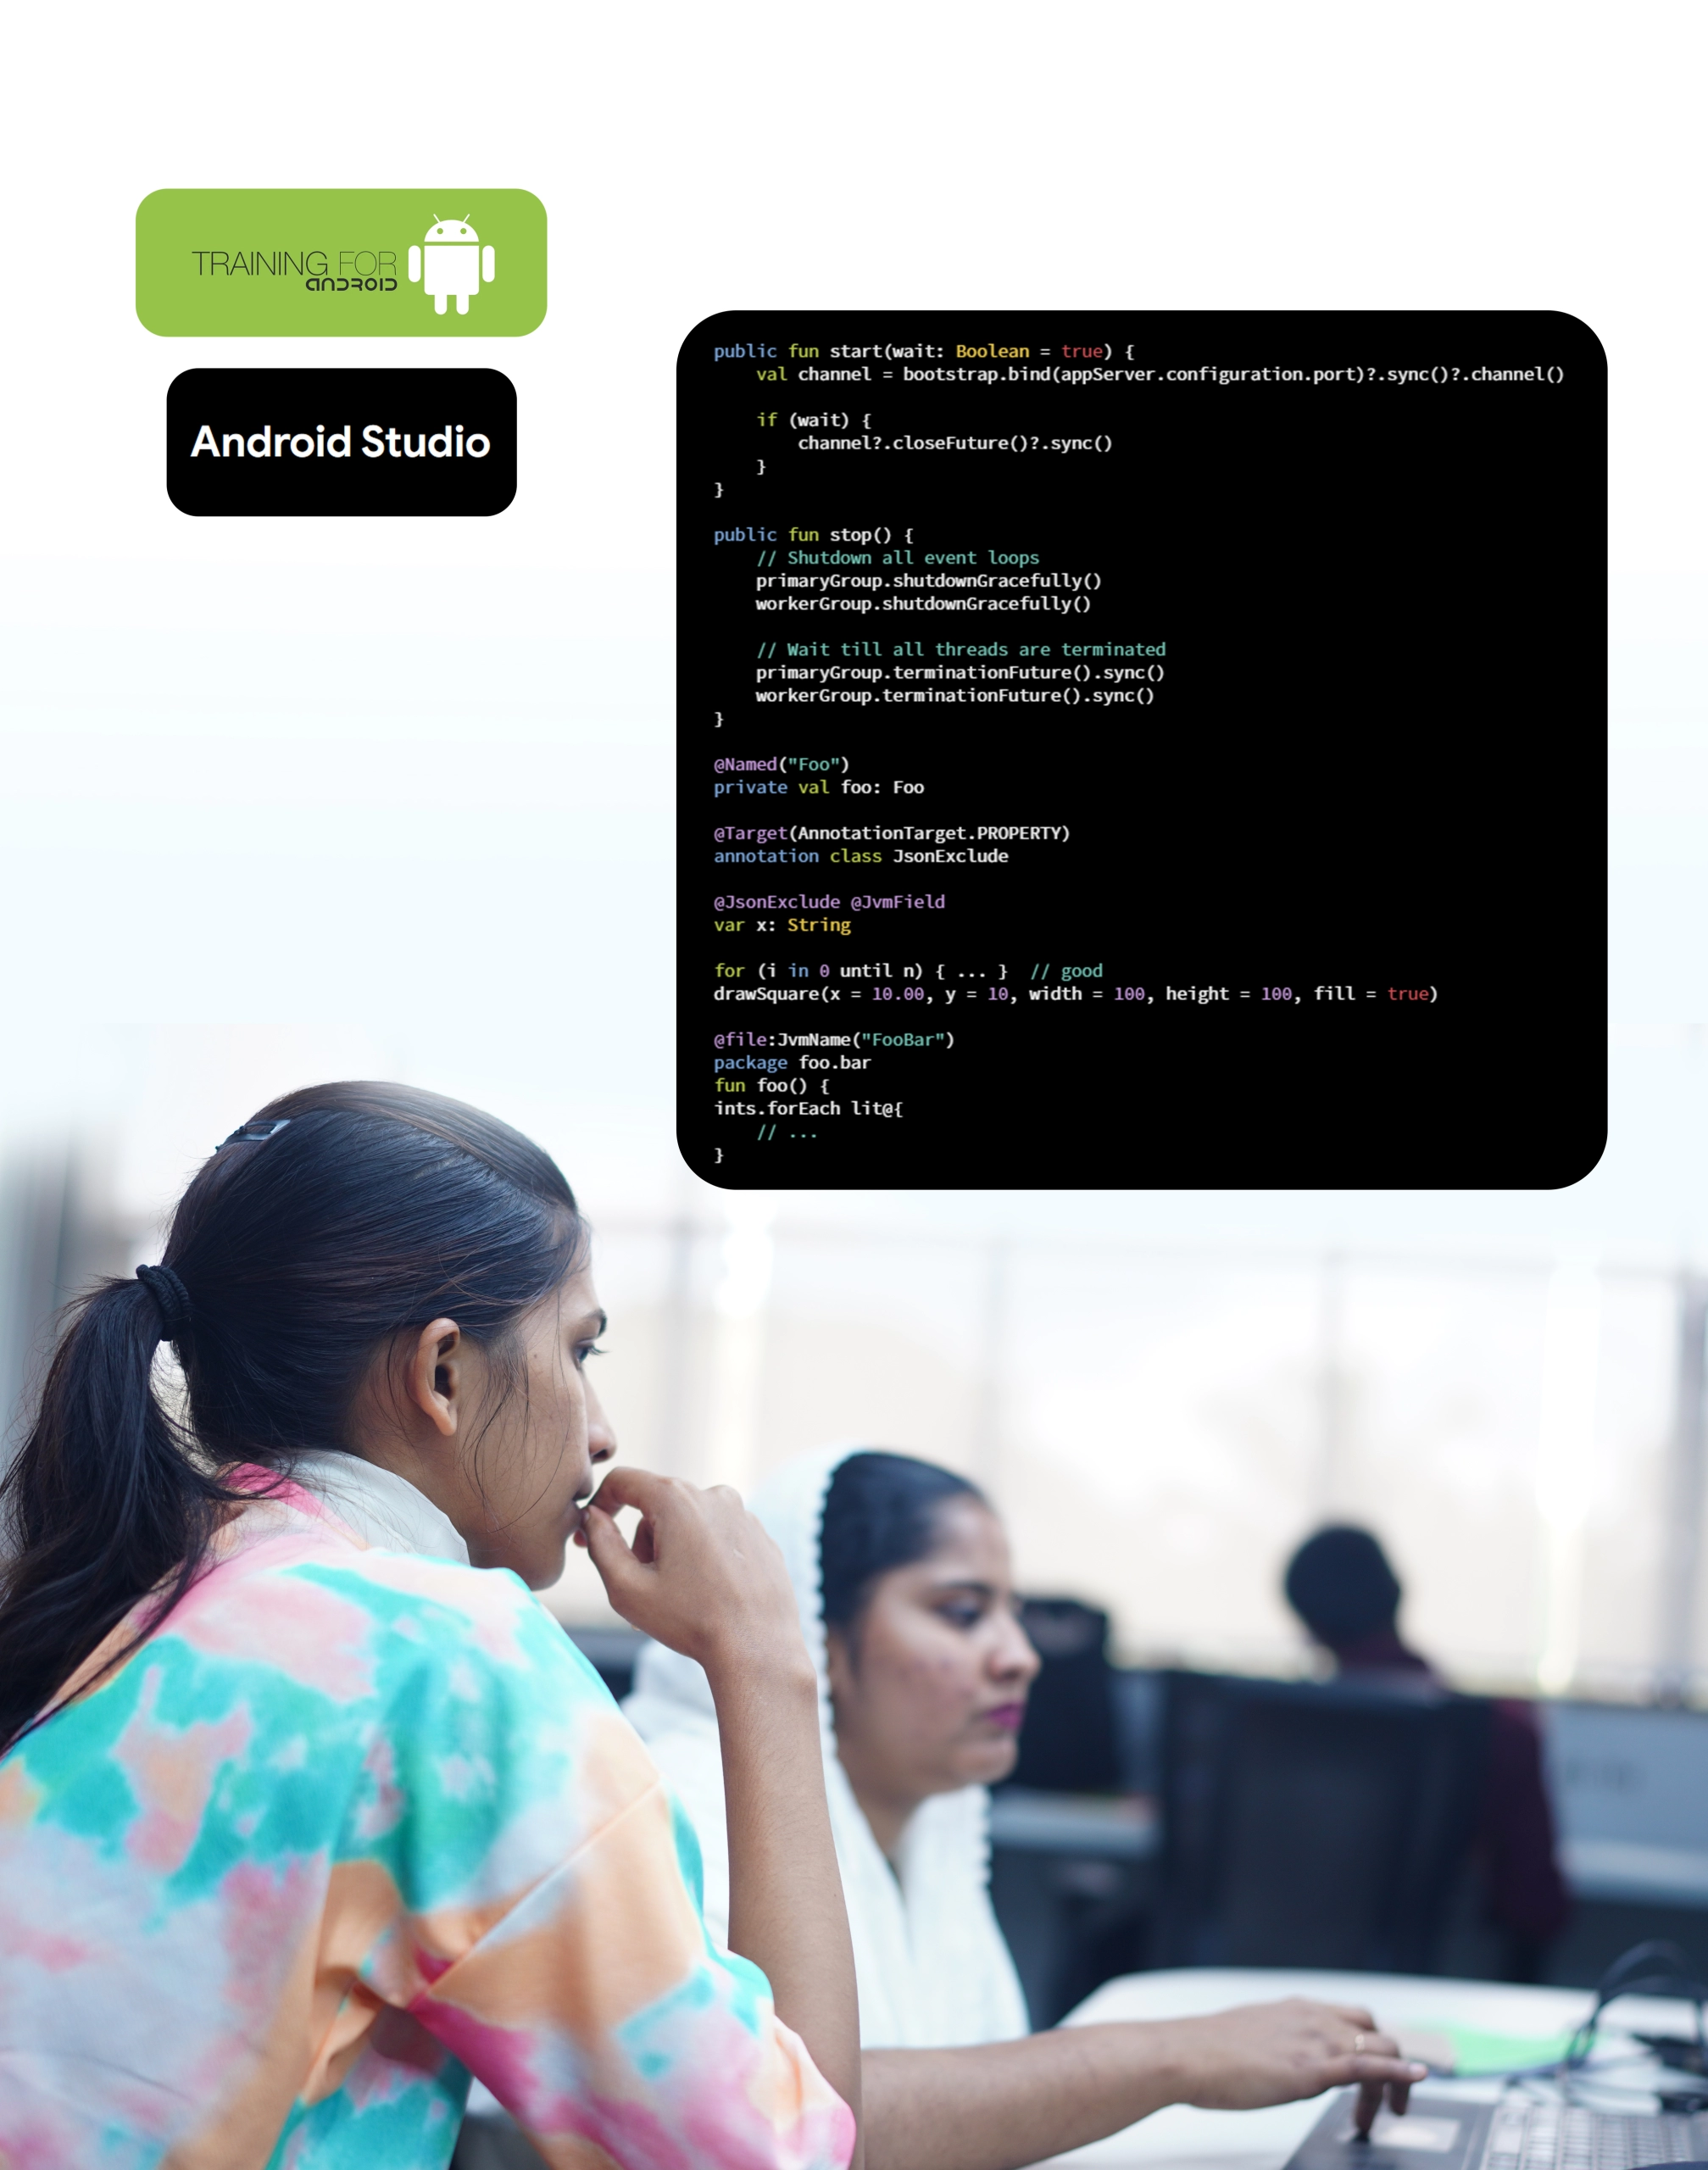 Android Training in Kerala